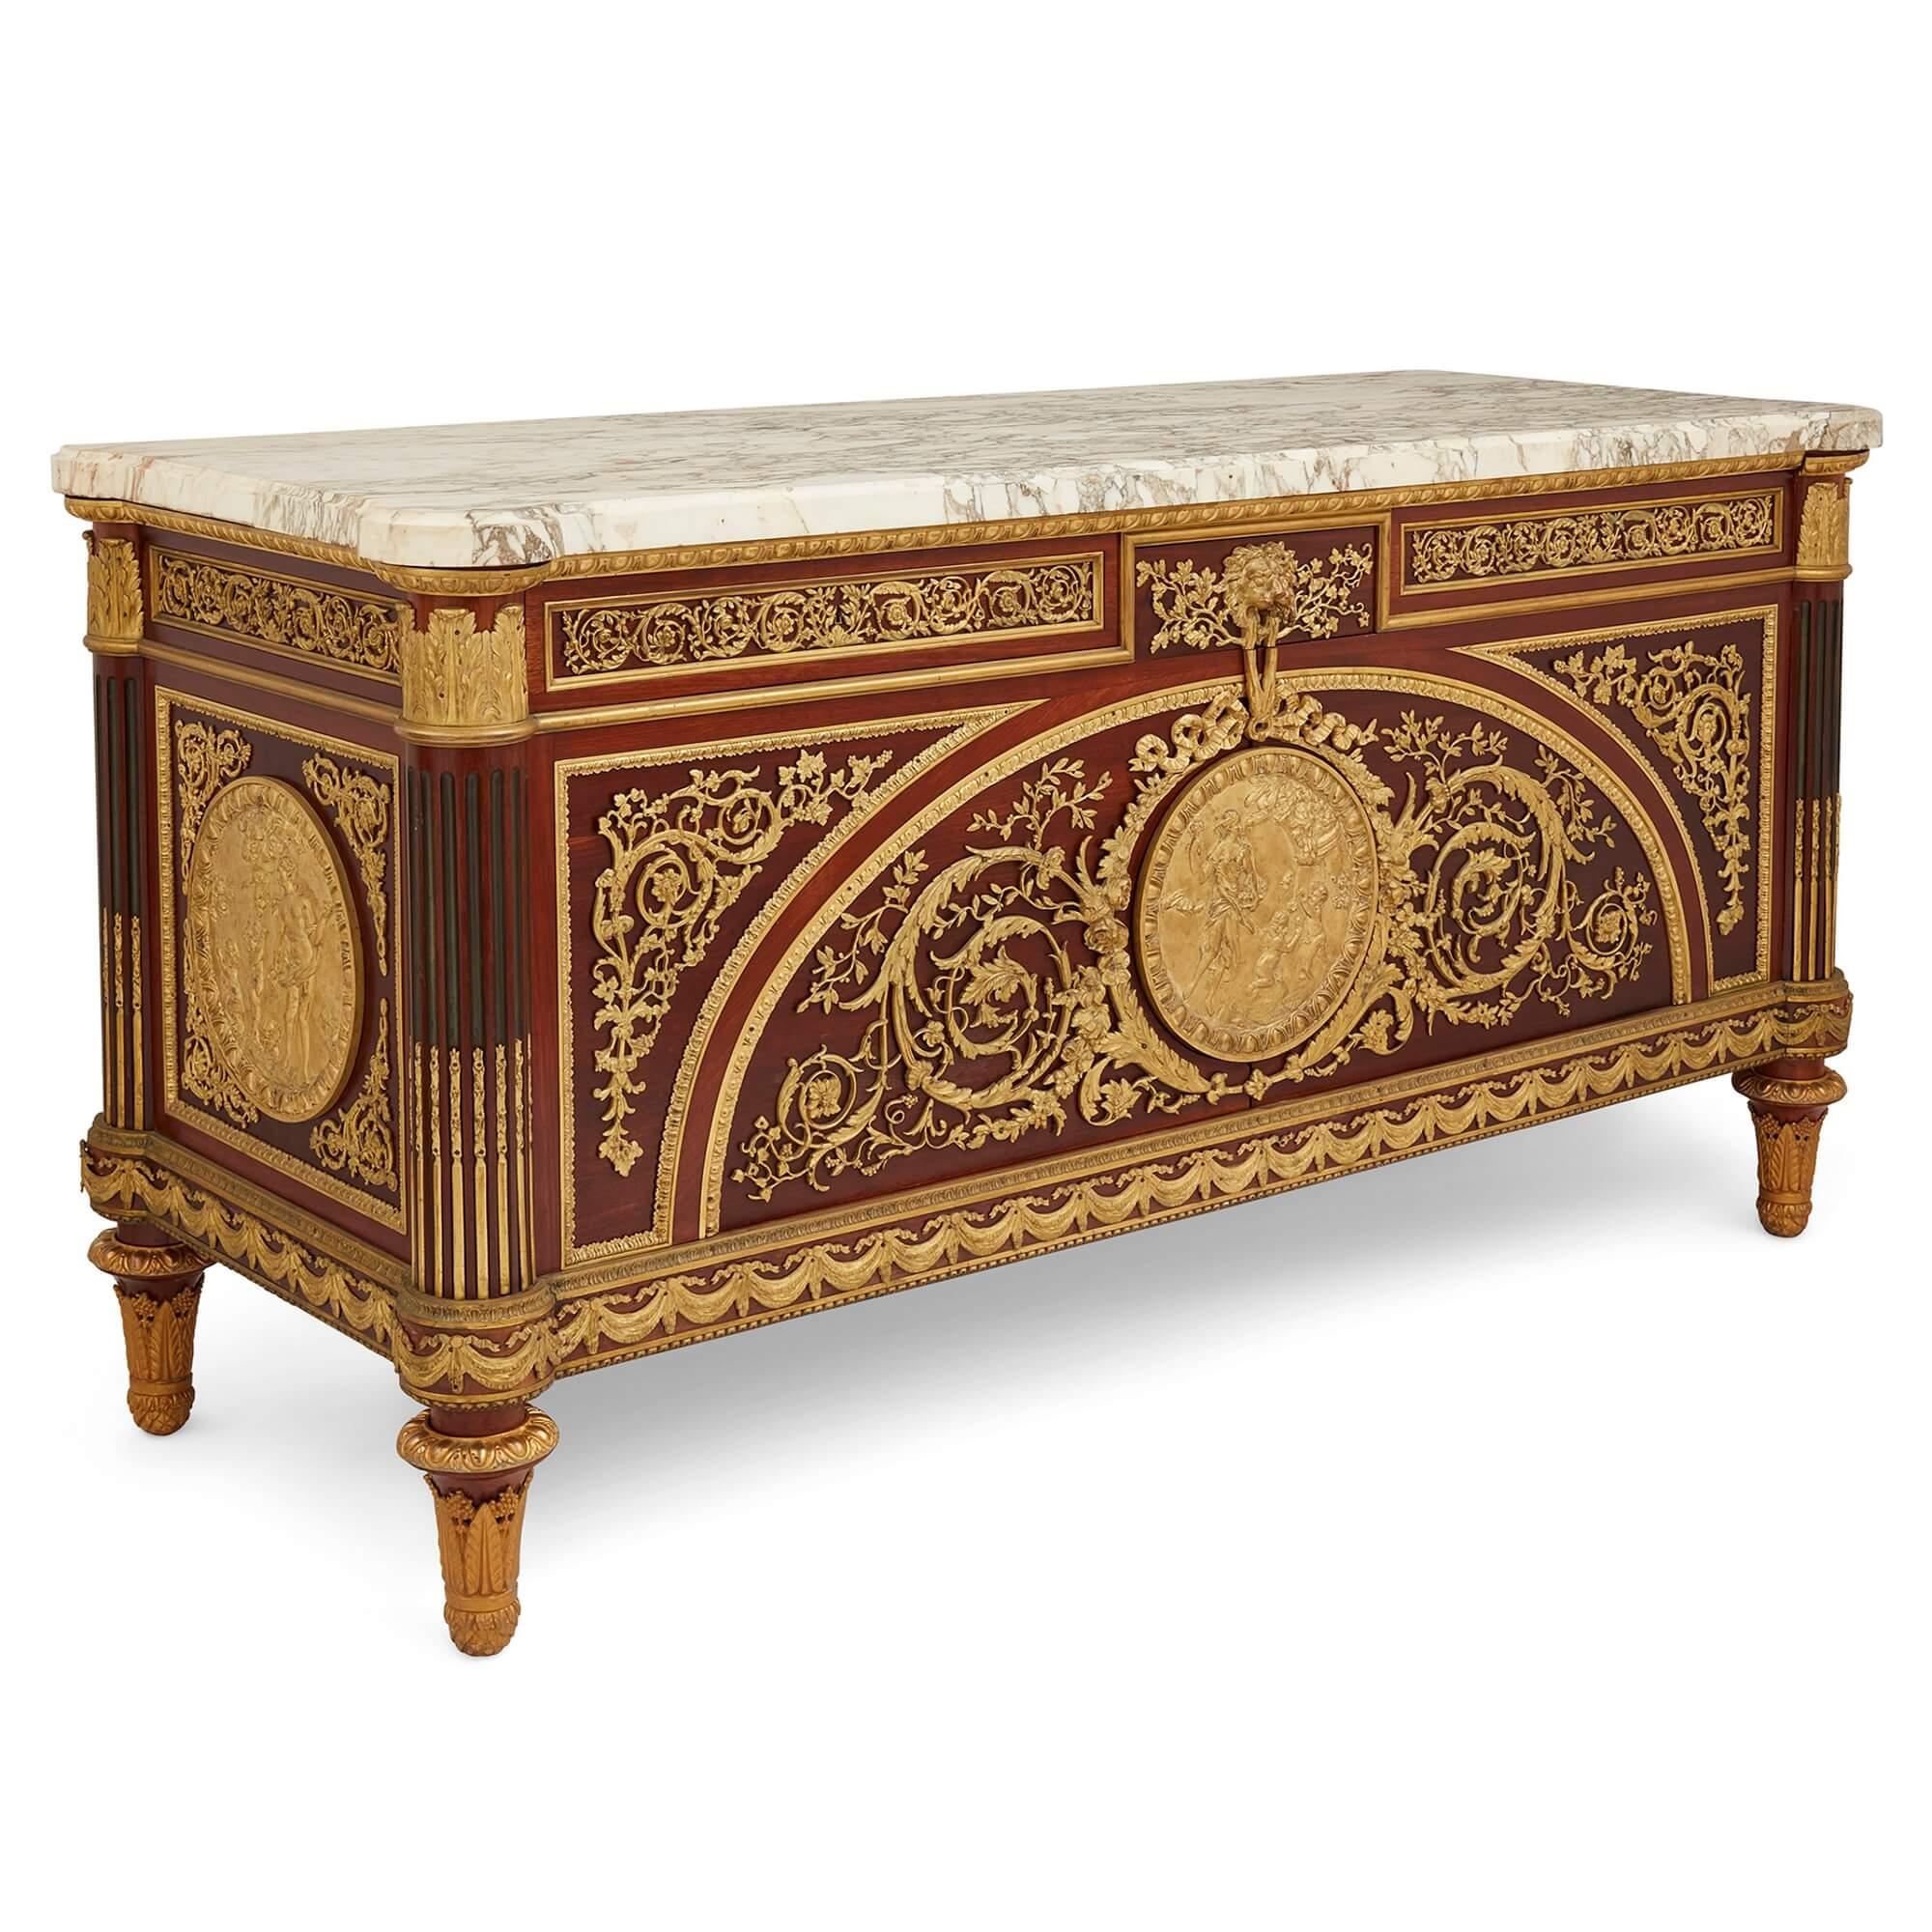 Antique French Louis XVI style ormolu-mounted commode after Benneman 
French, Early 20th Century
Height 93cm, width 179cm, depth 69cm

This outstanding commode à vanteaux is after a design by Joseph Stockel (1743-1802) and Guillaume Benneman (1750-